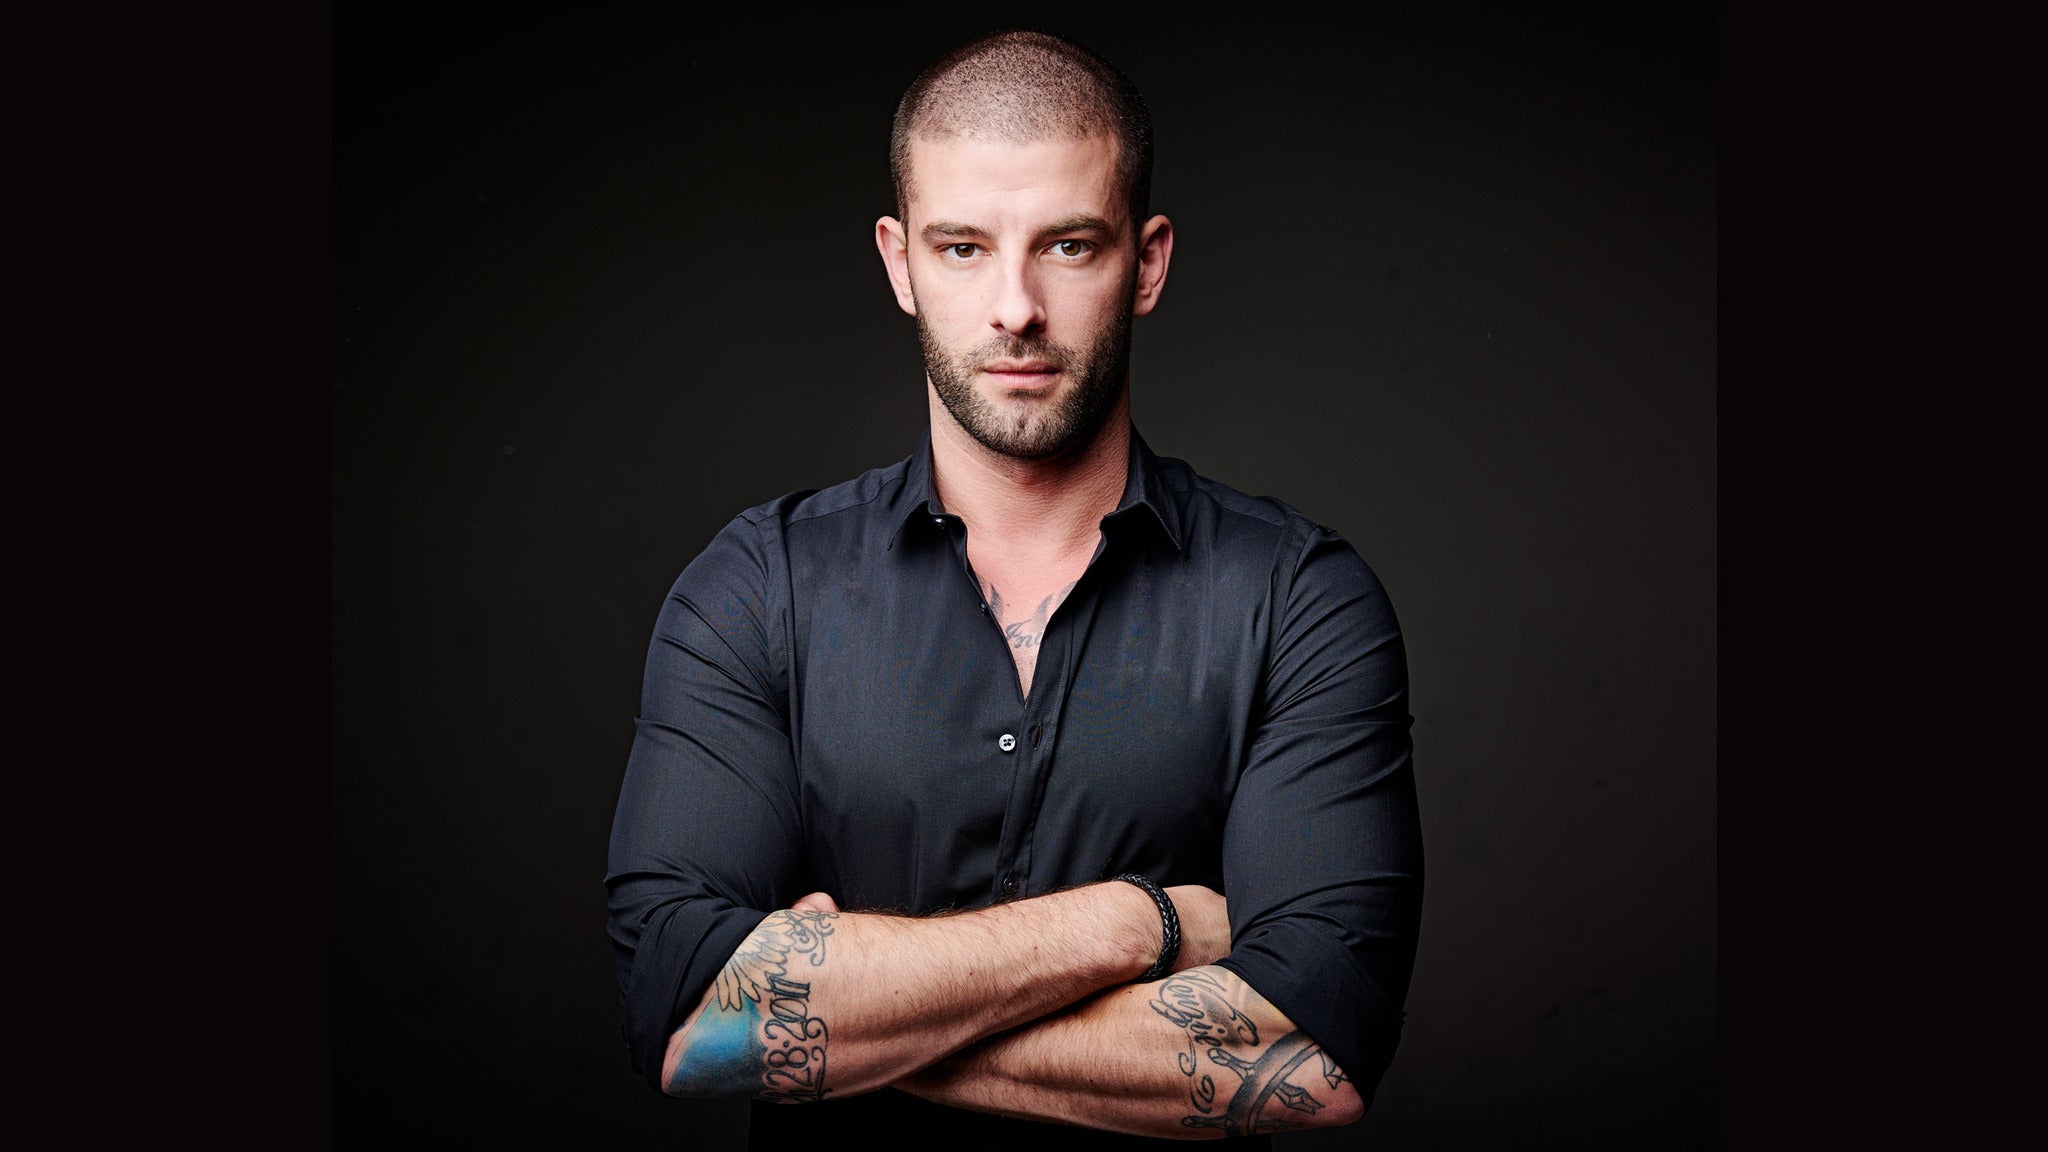 An Evening With Darcy Oake A Fundraiser For The Bruce Oake Foundation in Winnipeg promo photo for Darcy Oake VIP Package presale offer code